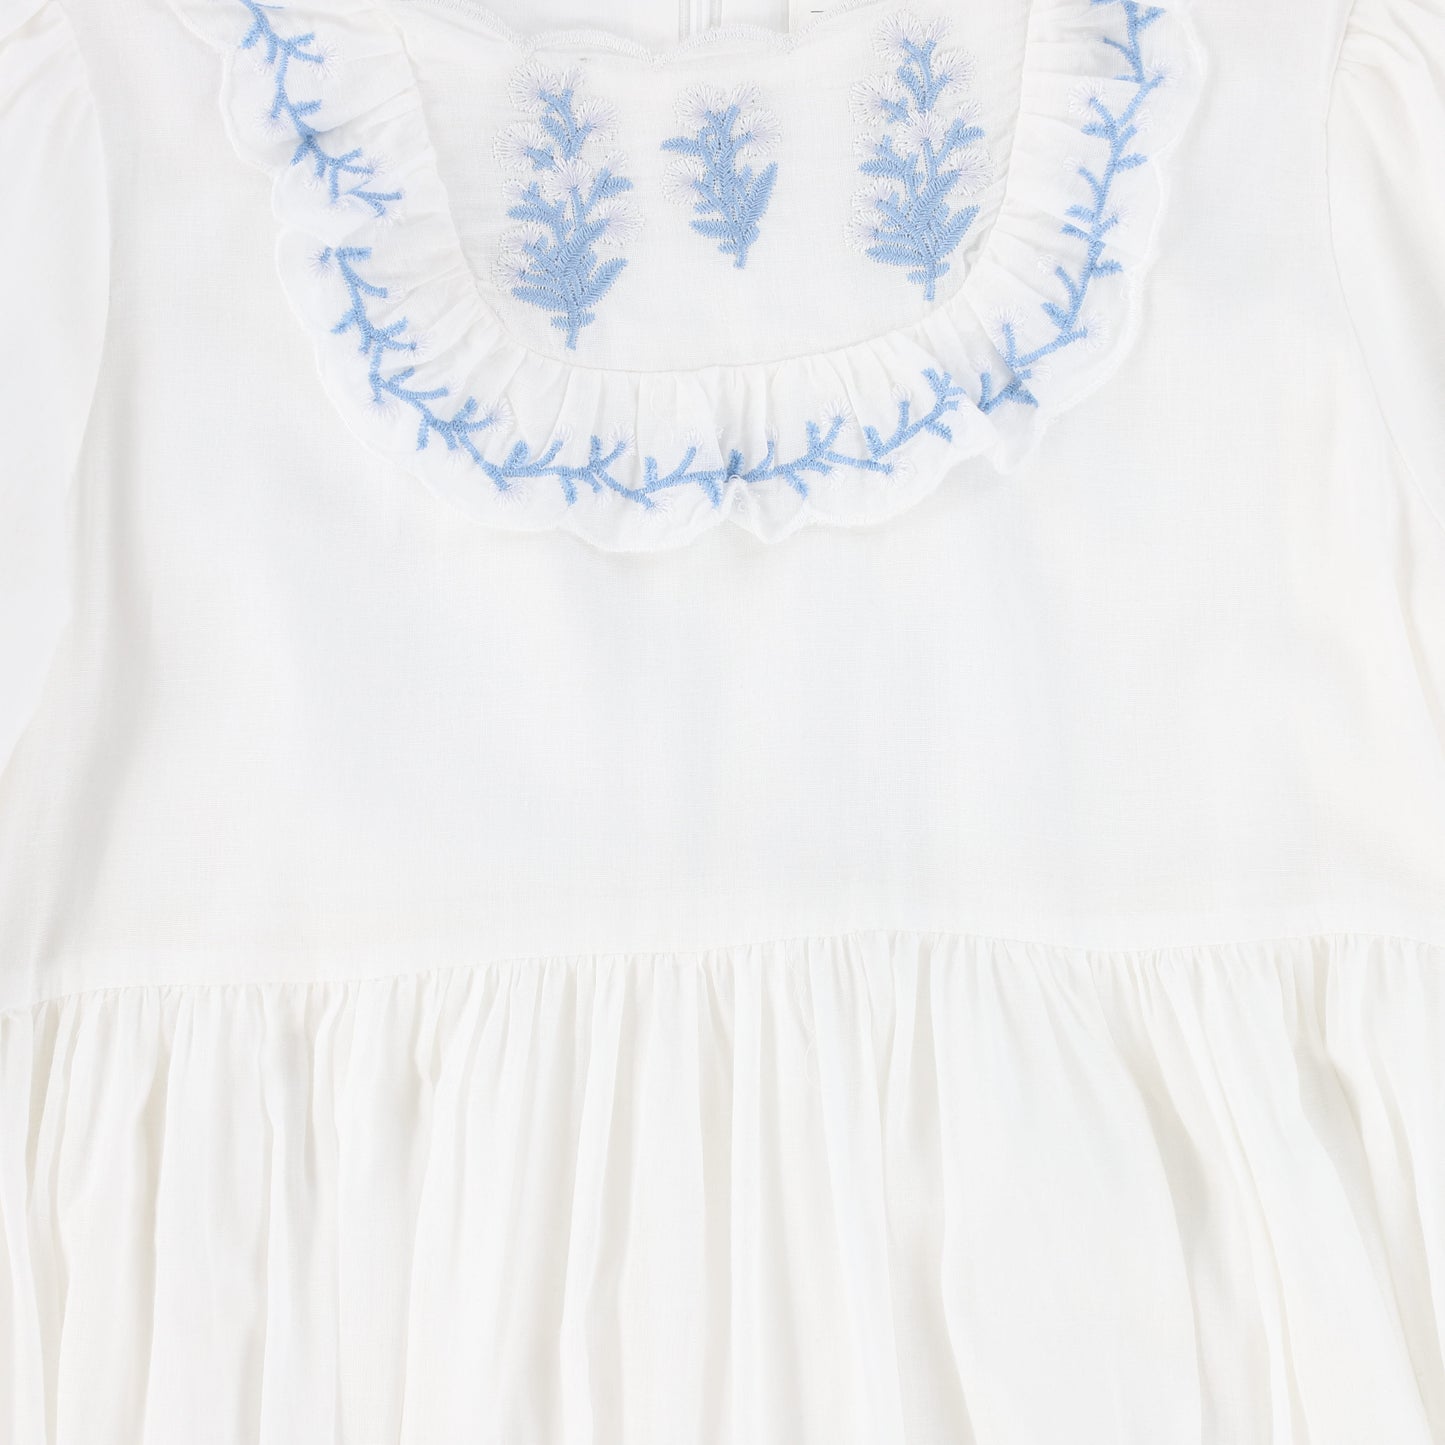 BAMBOO WHITE EMBROIDERED SCALLOP TRIM DRESS [FINAL SALE]